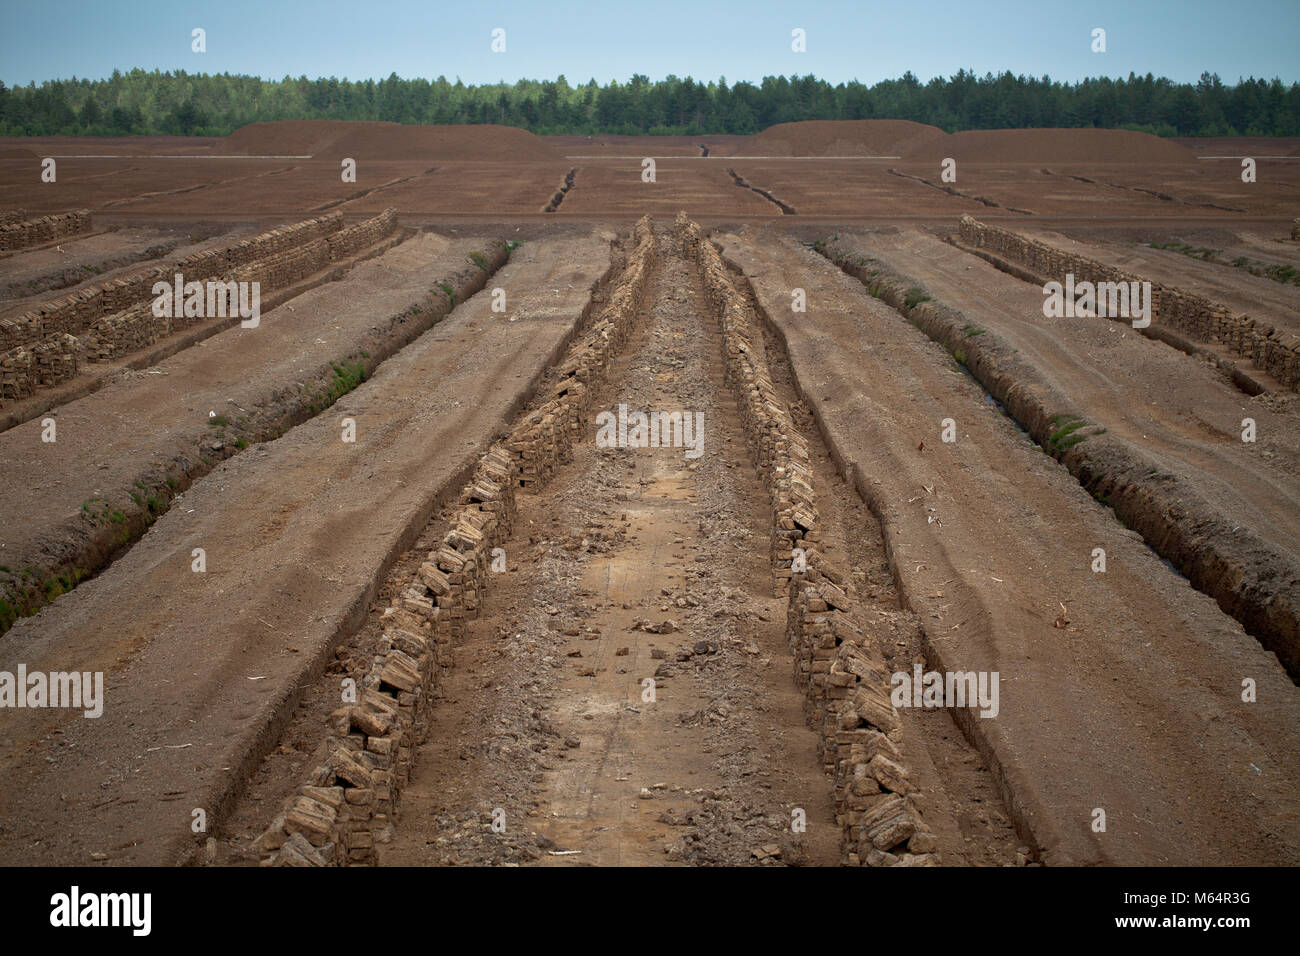 Peat industry photographs. As main peat extraction type in peat bogs we can observe the processing of chunk peat and milled peat. Stock Photo